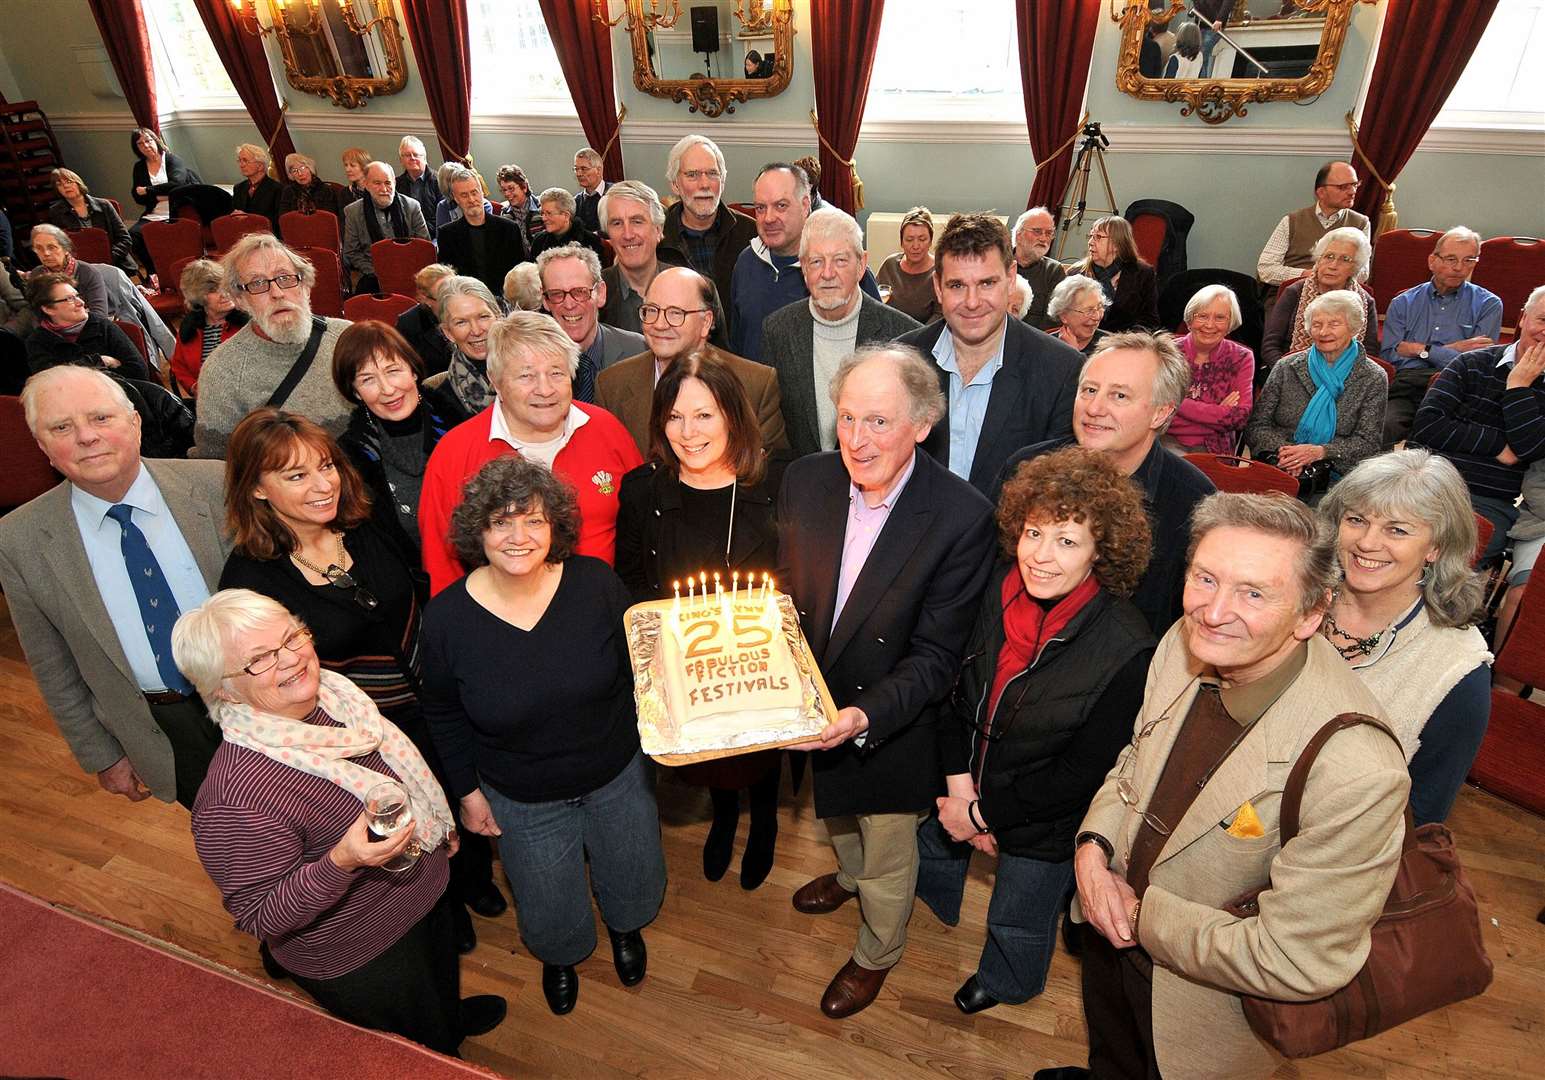 King's Lynn Fiction Festival chairman Tony Ellis holding a 25th celebration cake in 2013 surrounded by authors and the committee